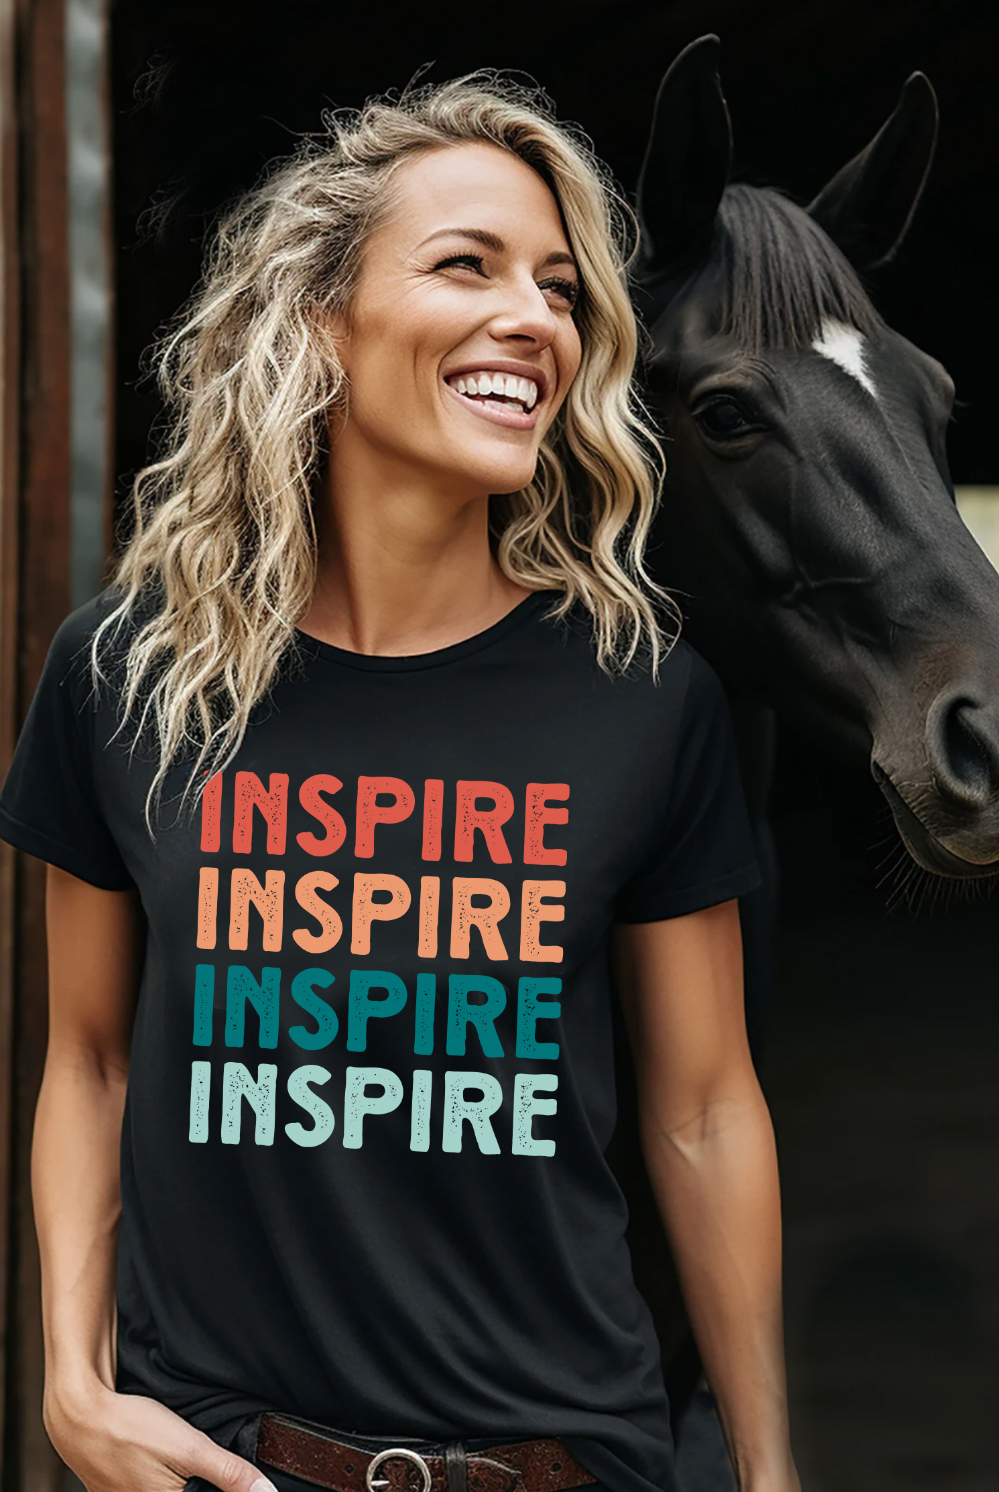 Inspire t-shirt in multiple colors. Country western vibe ladies unisex t-shirt from Bella and Canvas. Black shirt.